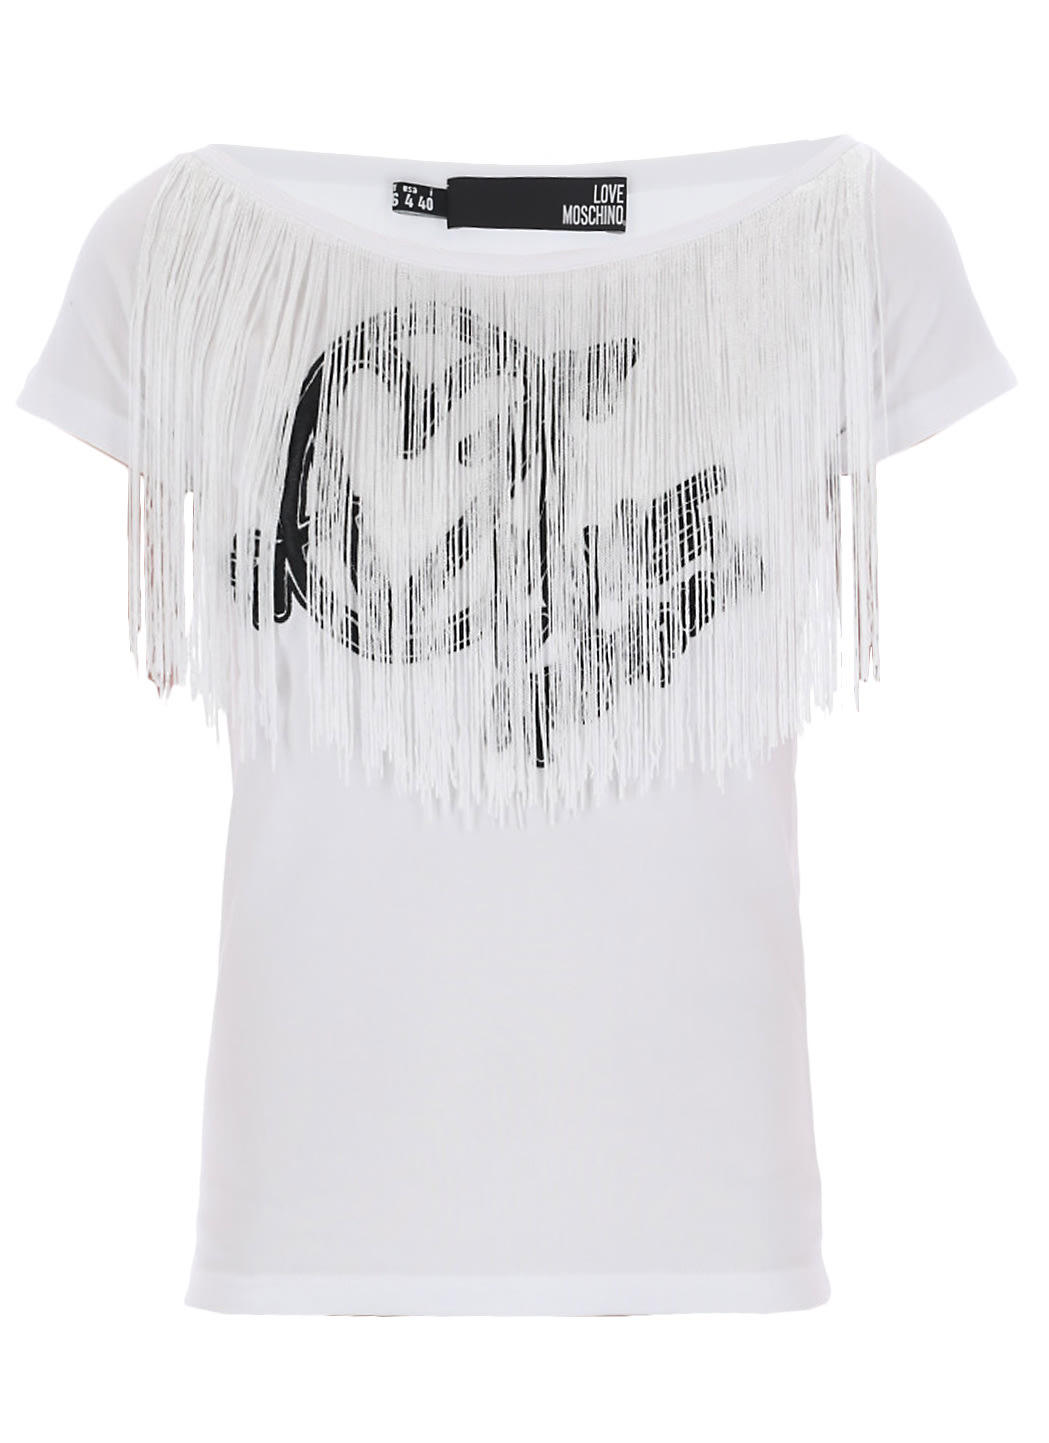 Love Moschino T-shirt With Fringes